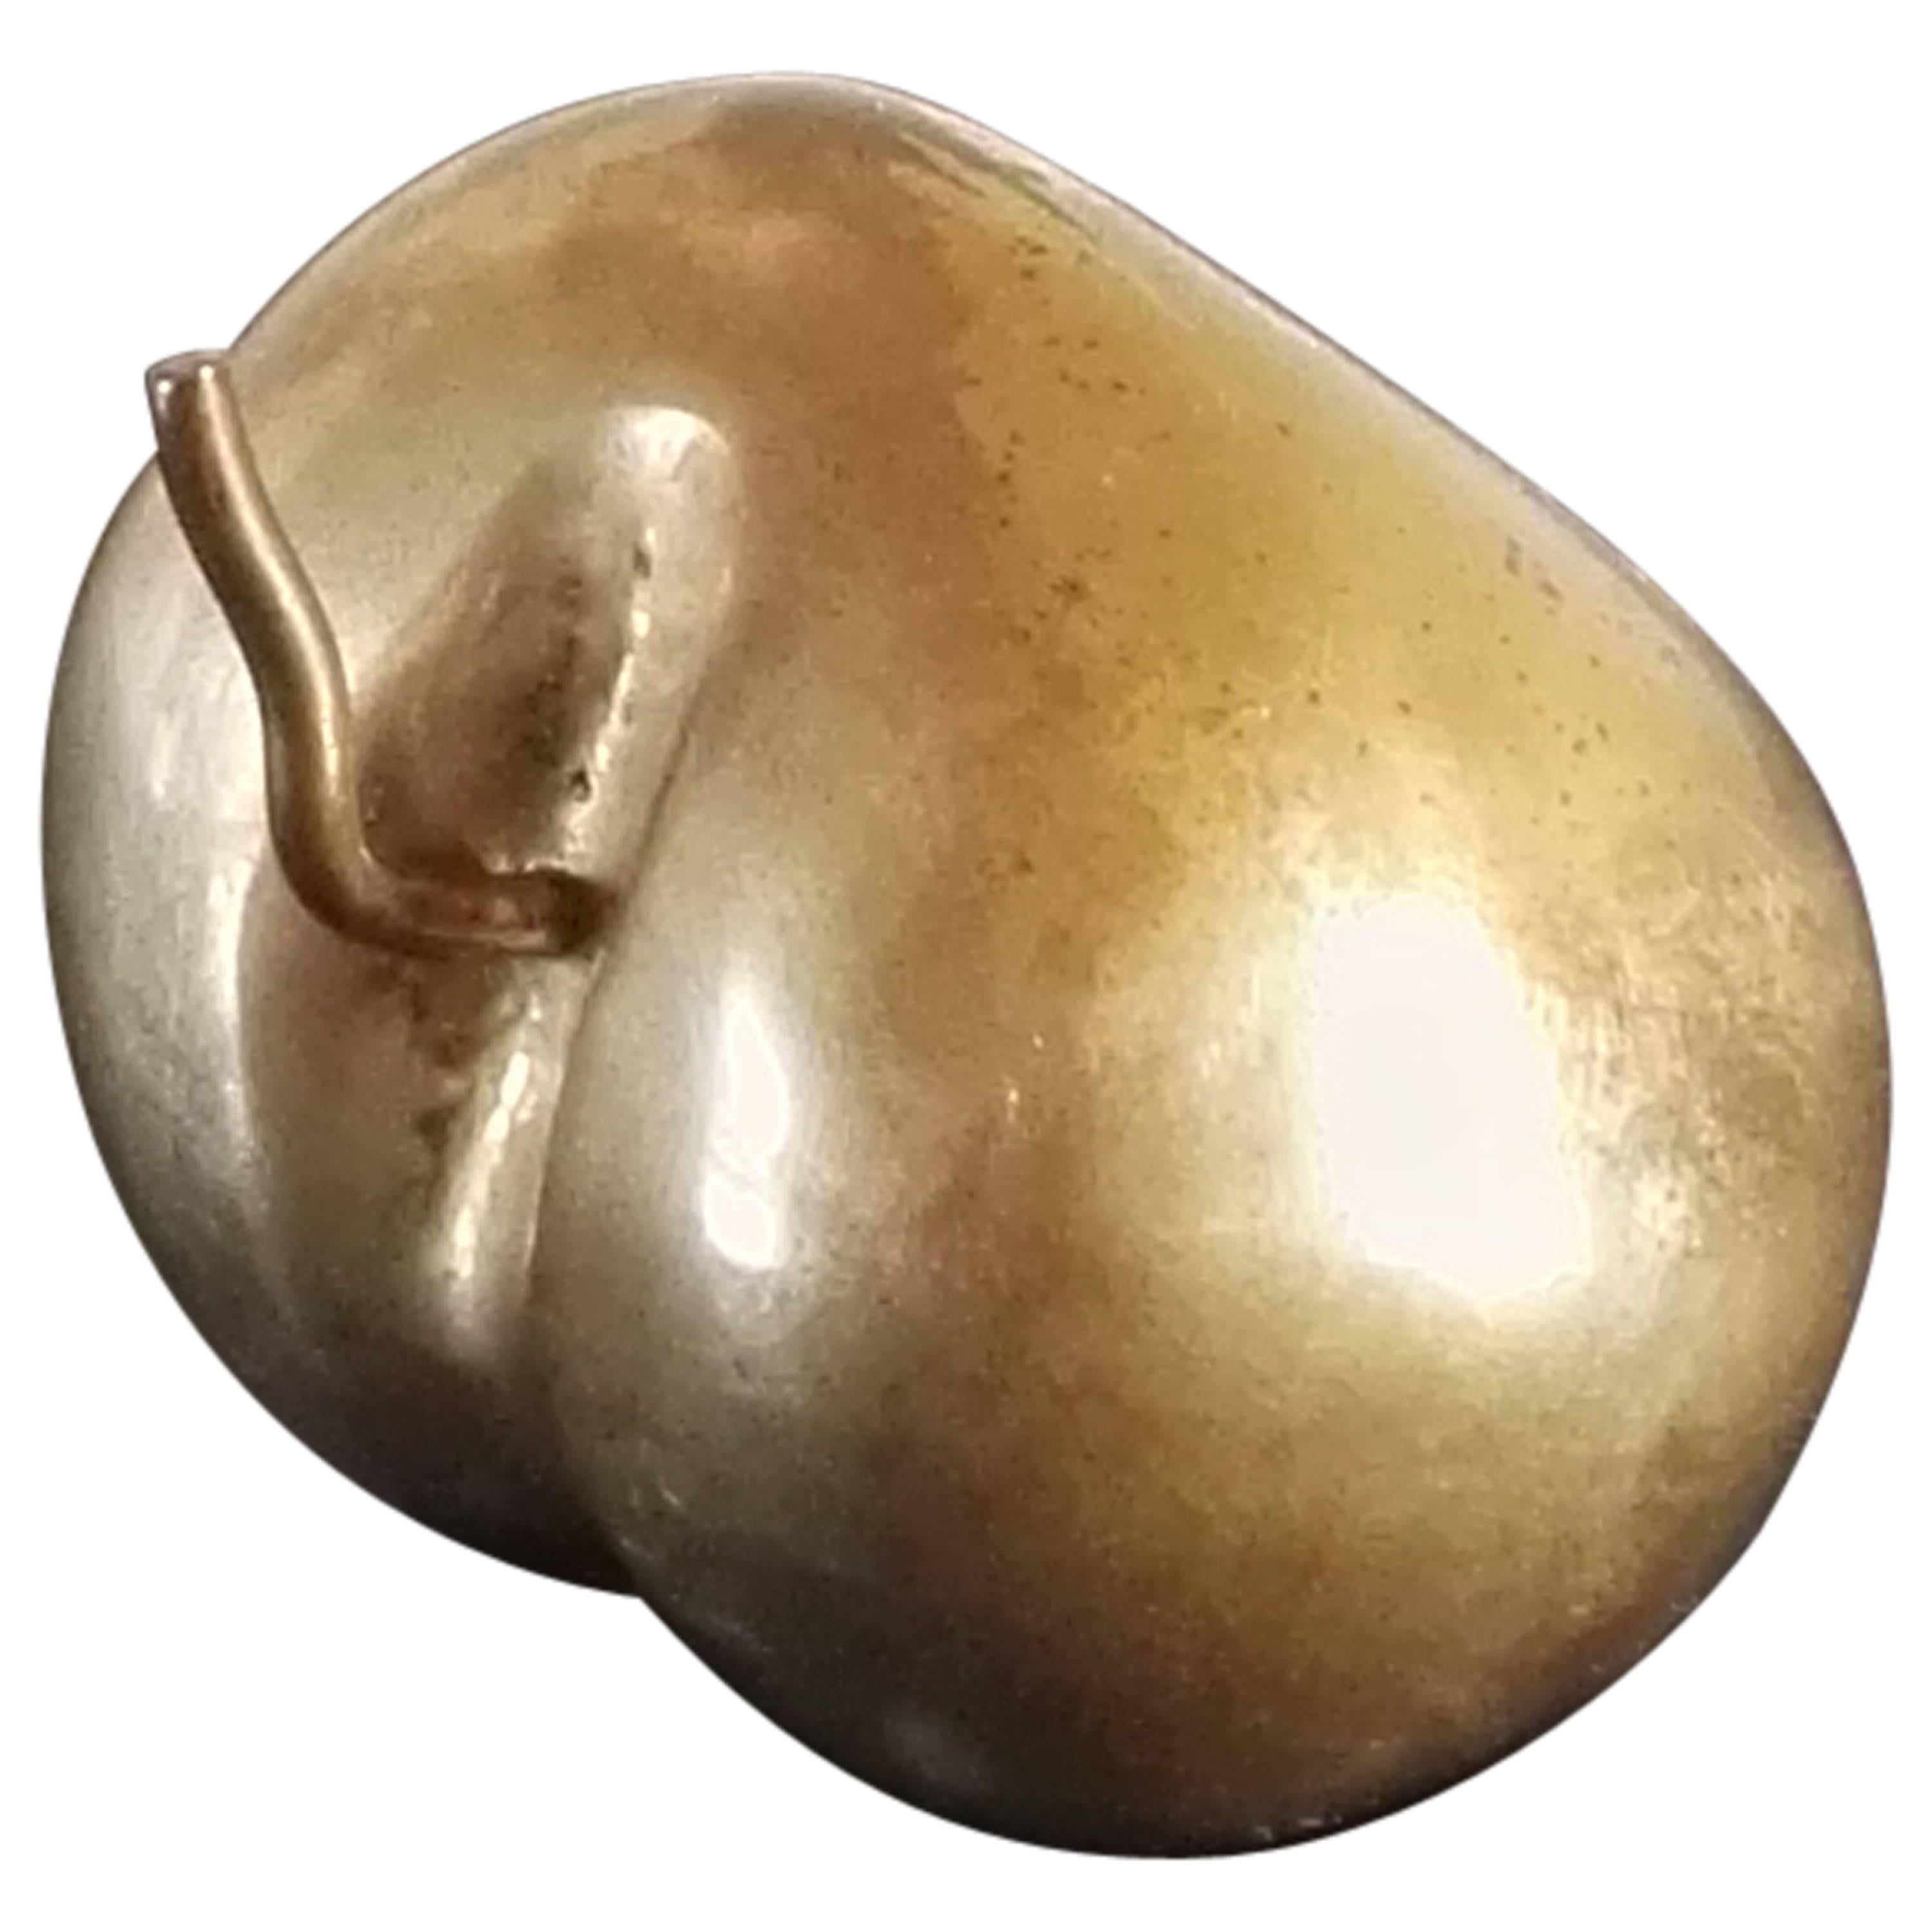 Chic Minimalist Miniature Apple Shaped Solid Bronze Paperweight, France, 1970s